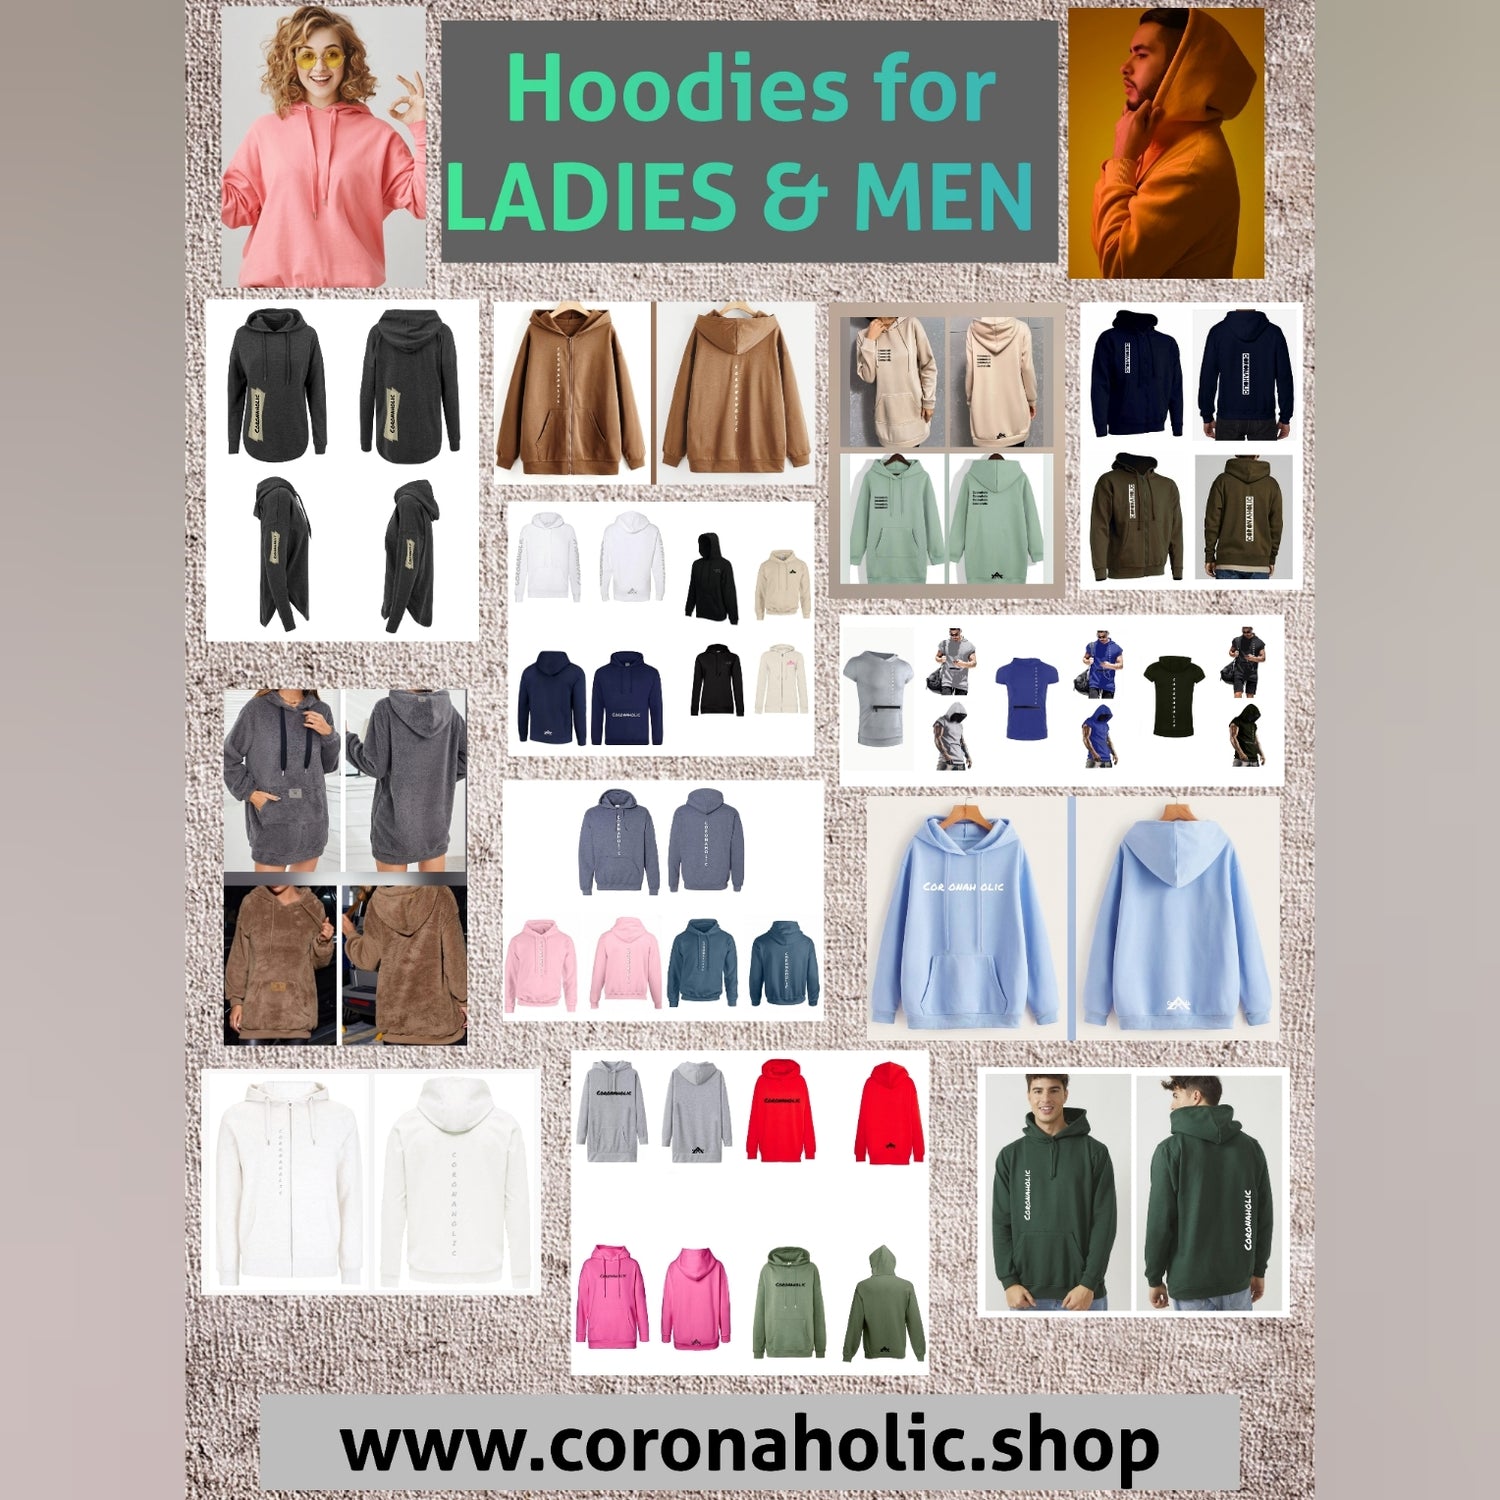 HOODIES for LADIES & MEN made by CORONAHOLIC Design&Label